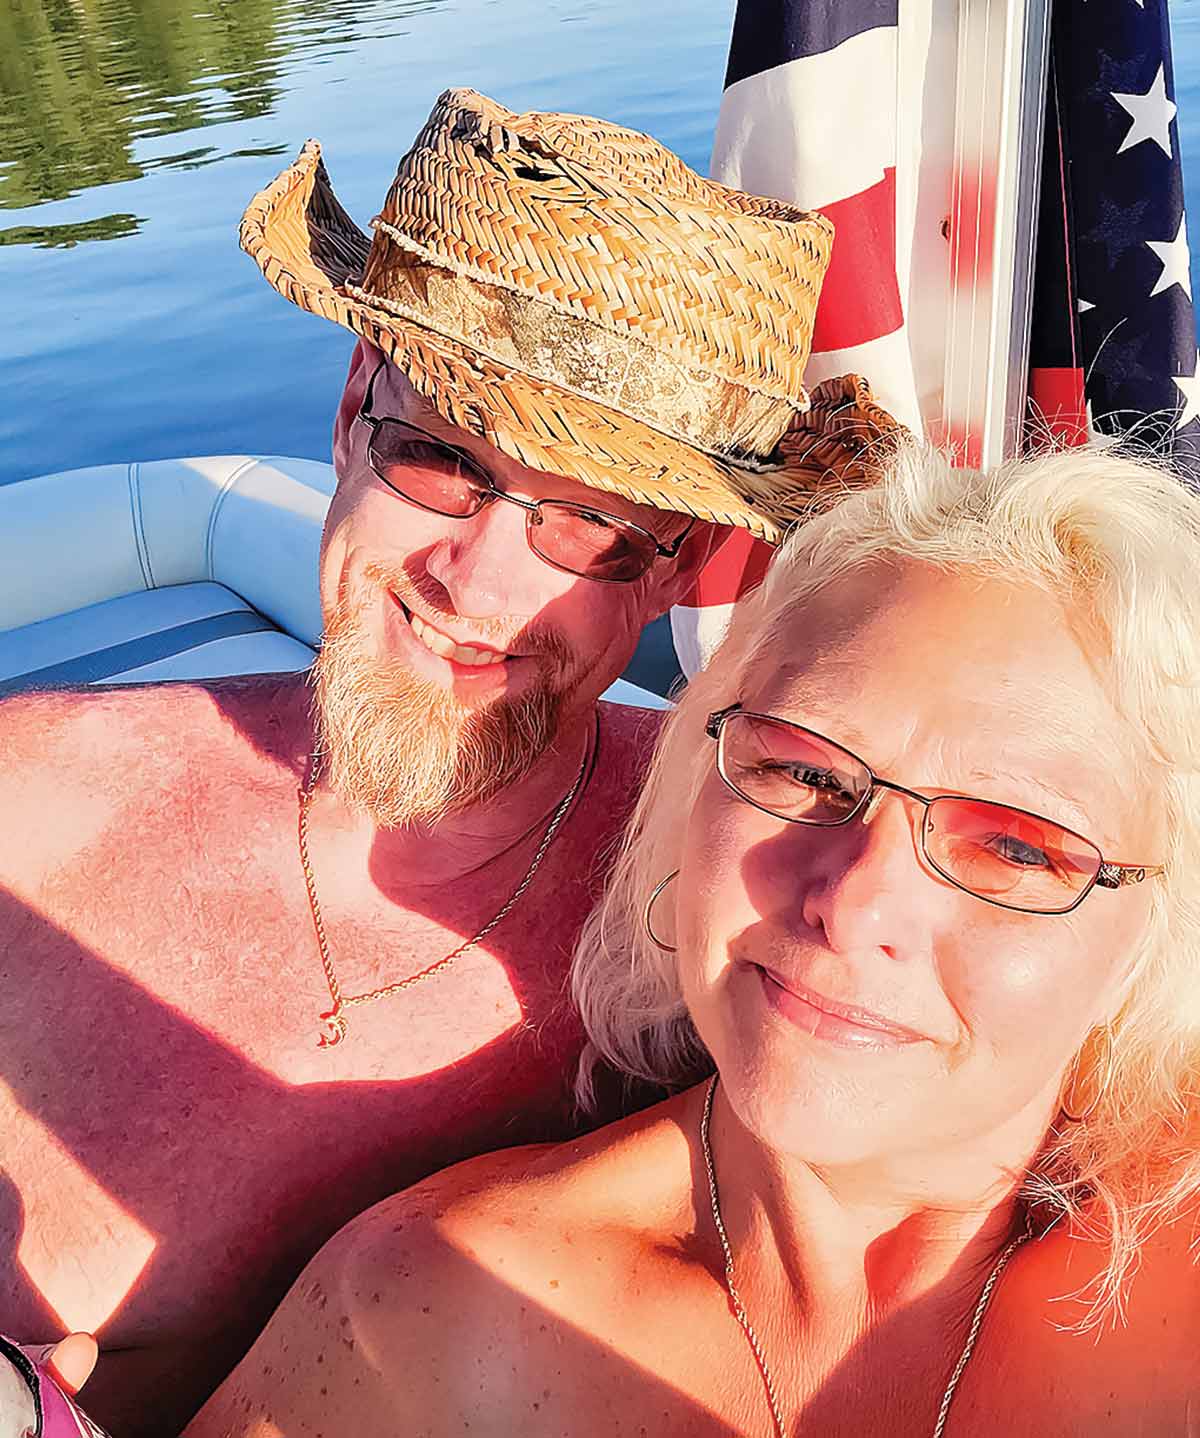 Tabatha and Donny Myers taking a selfie on their boat and enjoying the sun